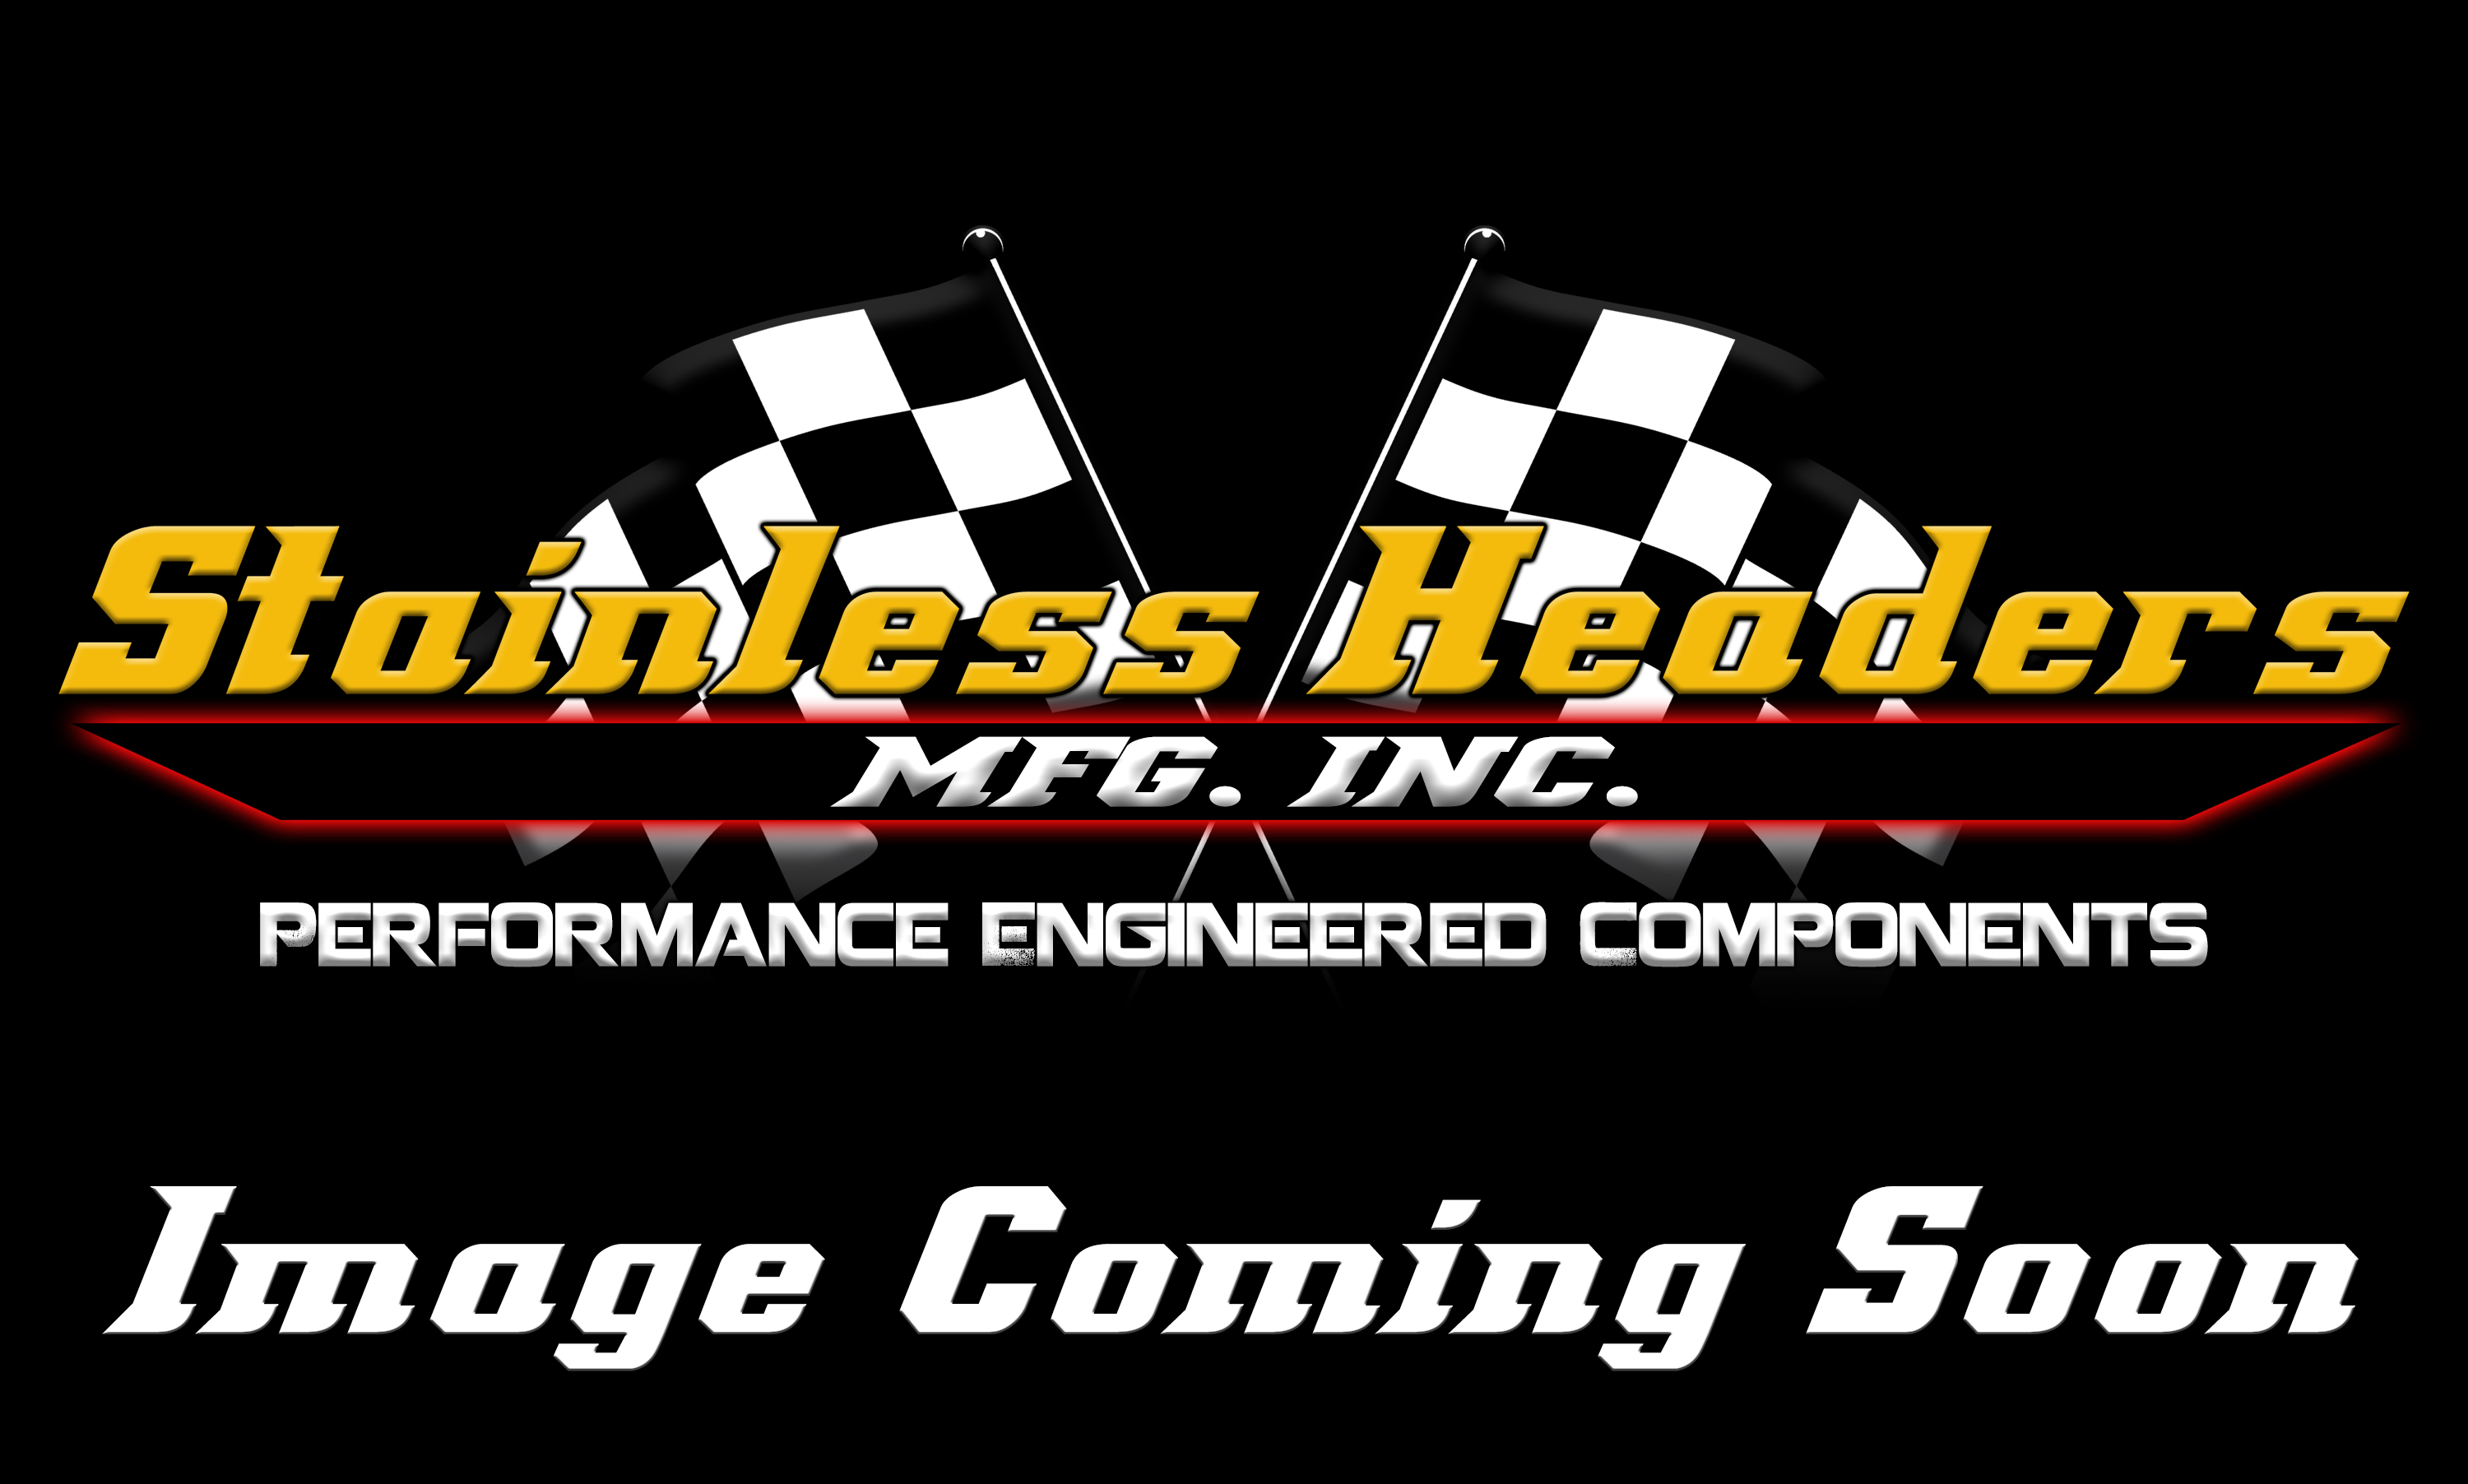 Stainless Headers - 2 1/8" Primary 3 into 1 Performance Merge Collector-16ga 304ss